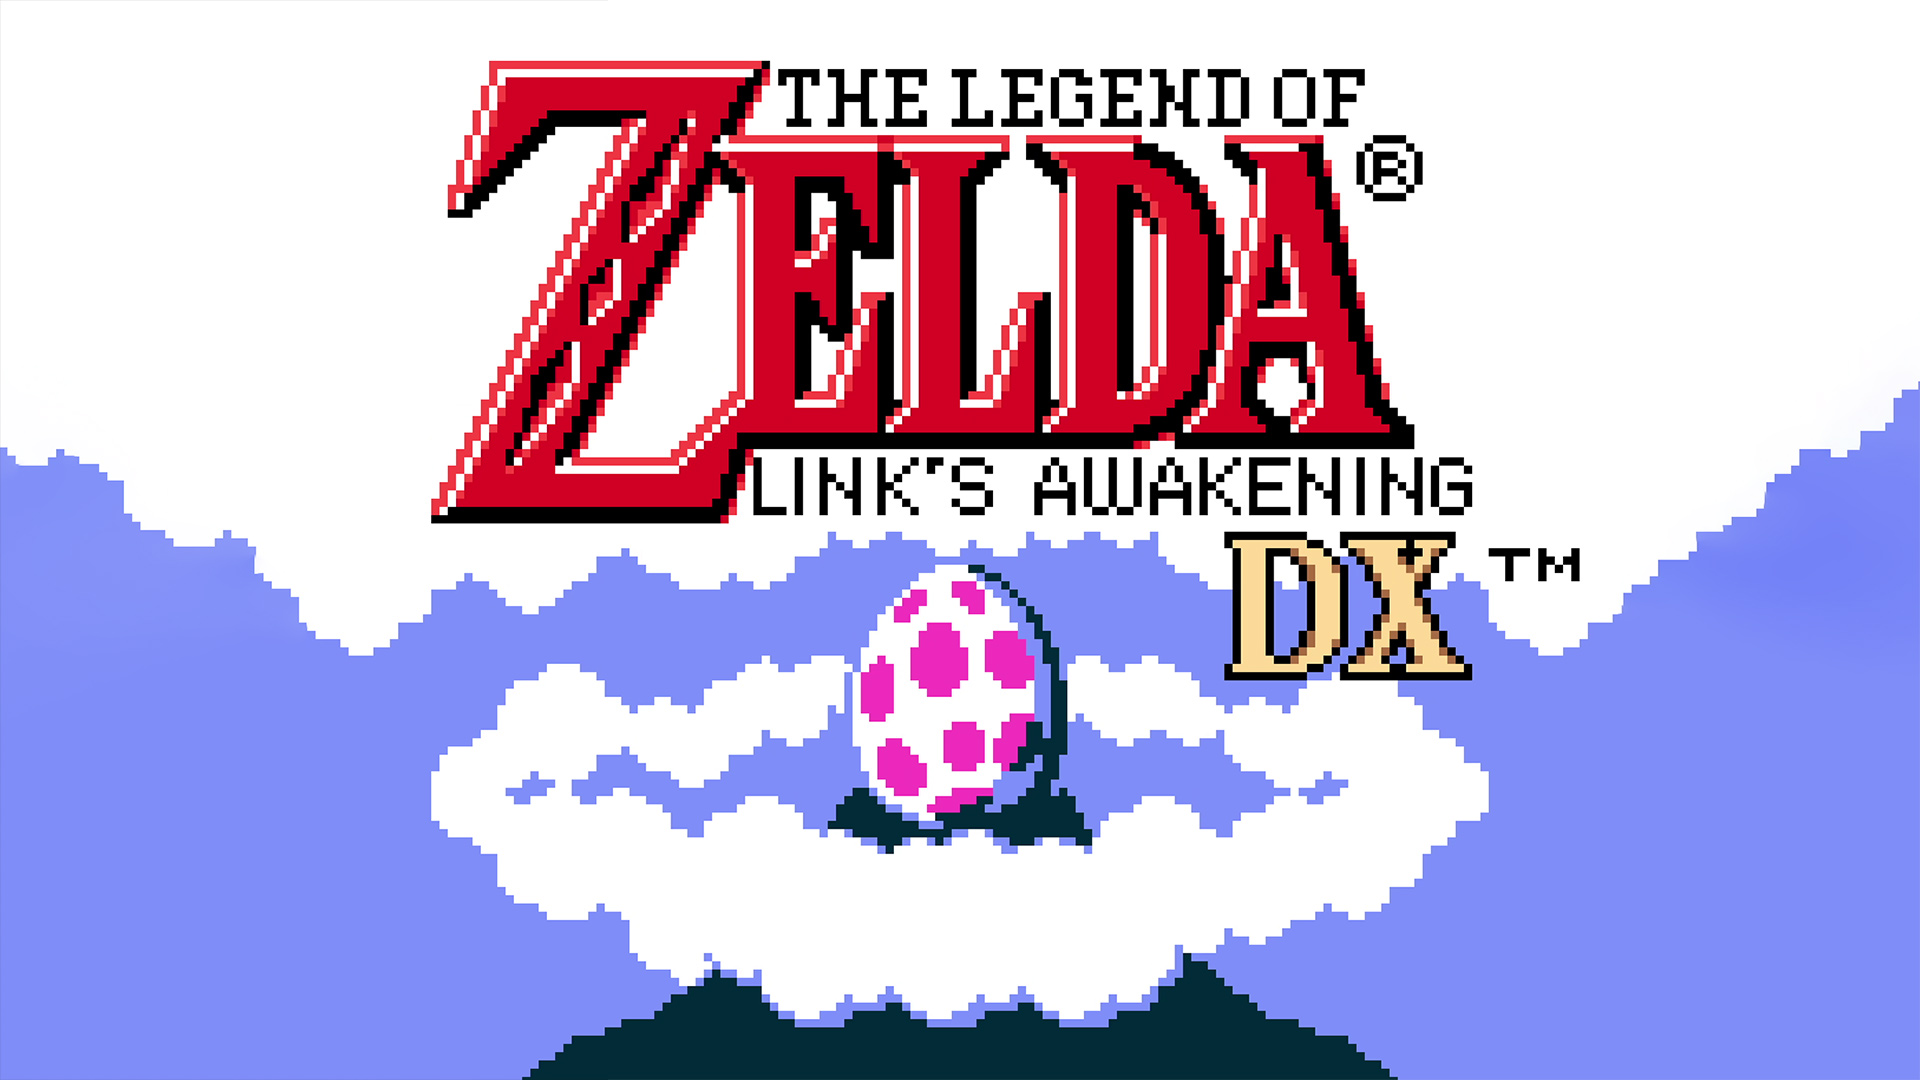 The Legend of Zelda: Link's Awakening DX by GlyphDX in 1:21:09- Awesome  Games Done Quick 2021 Online 